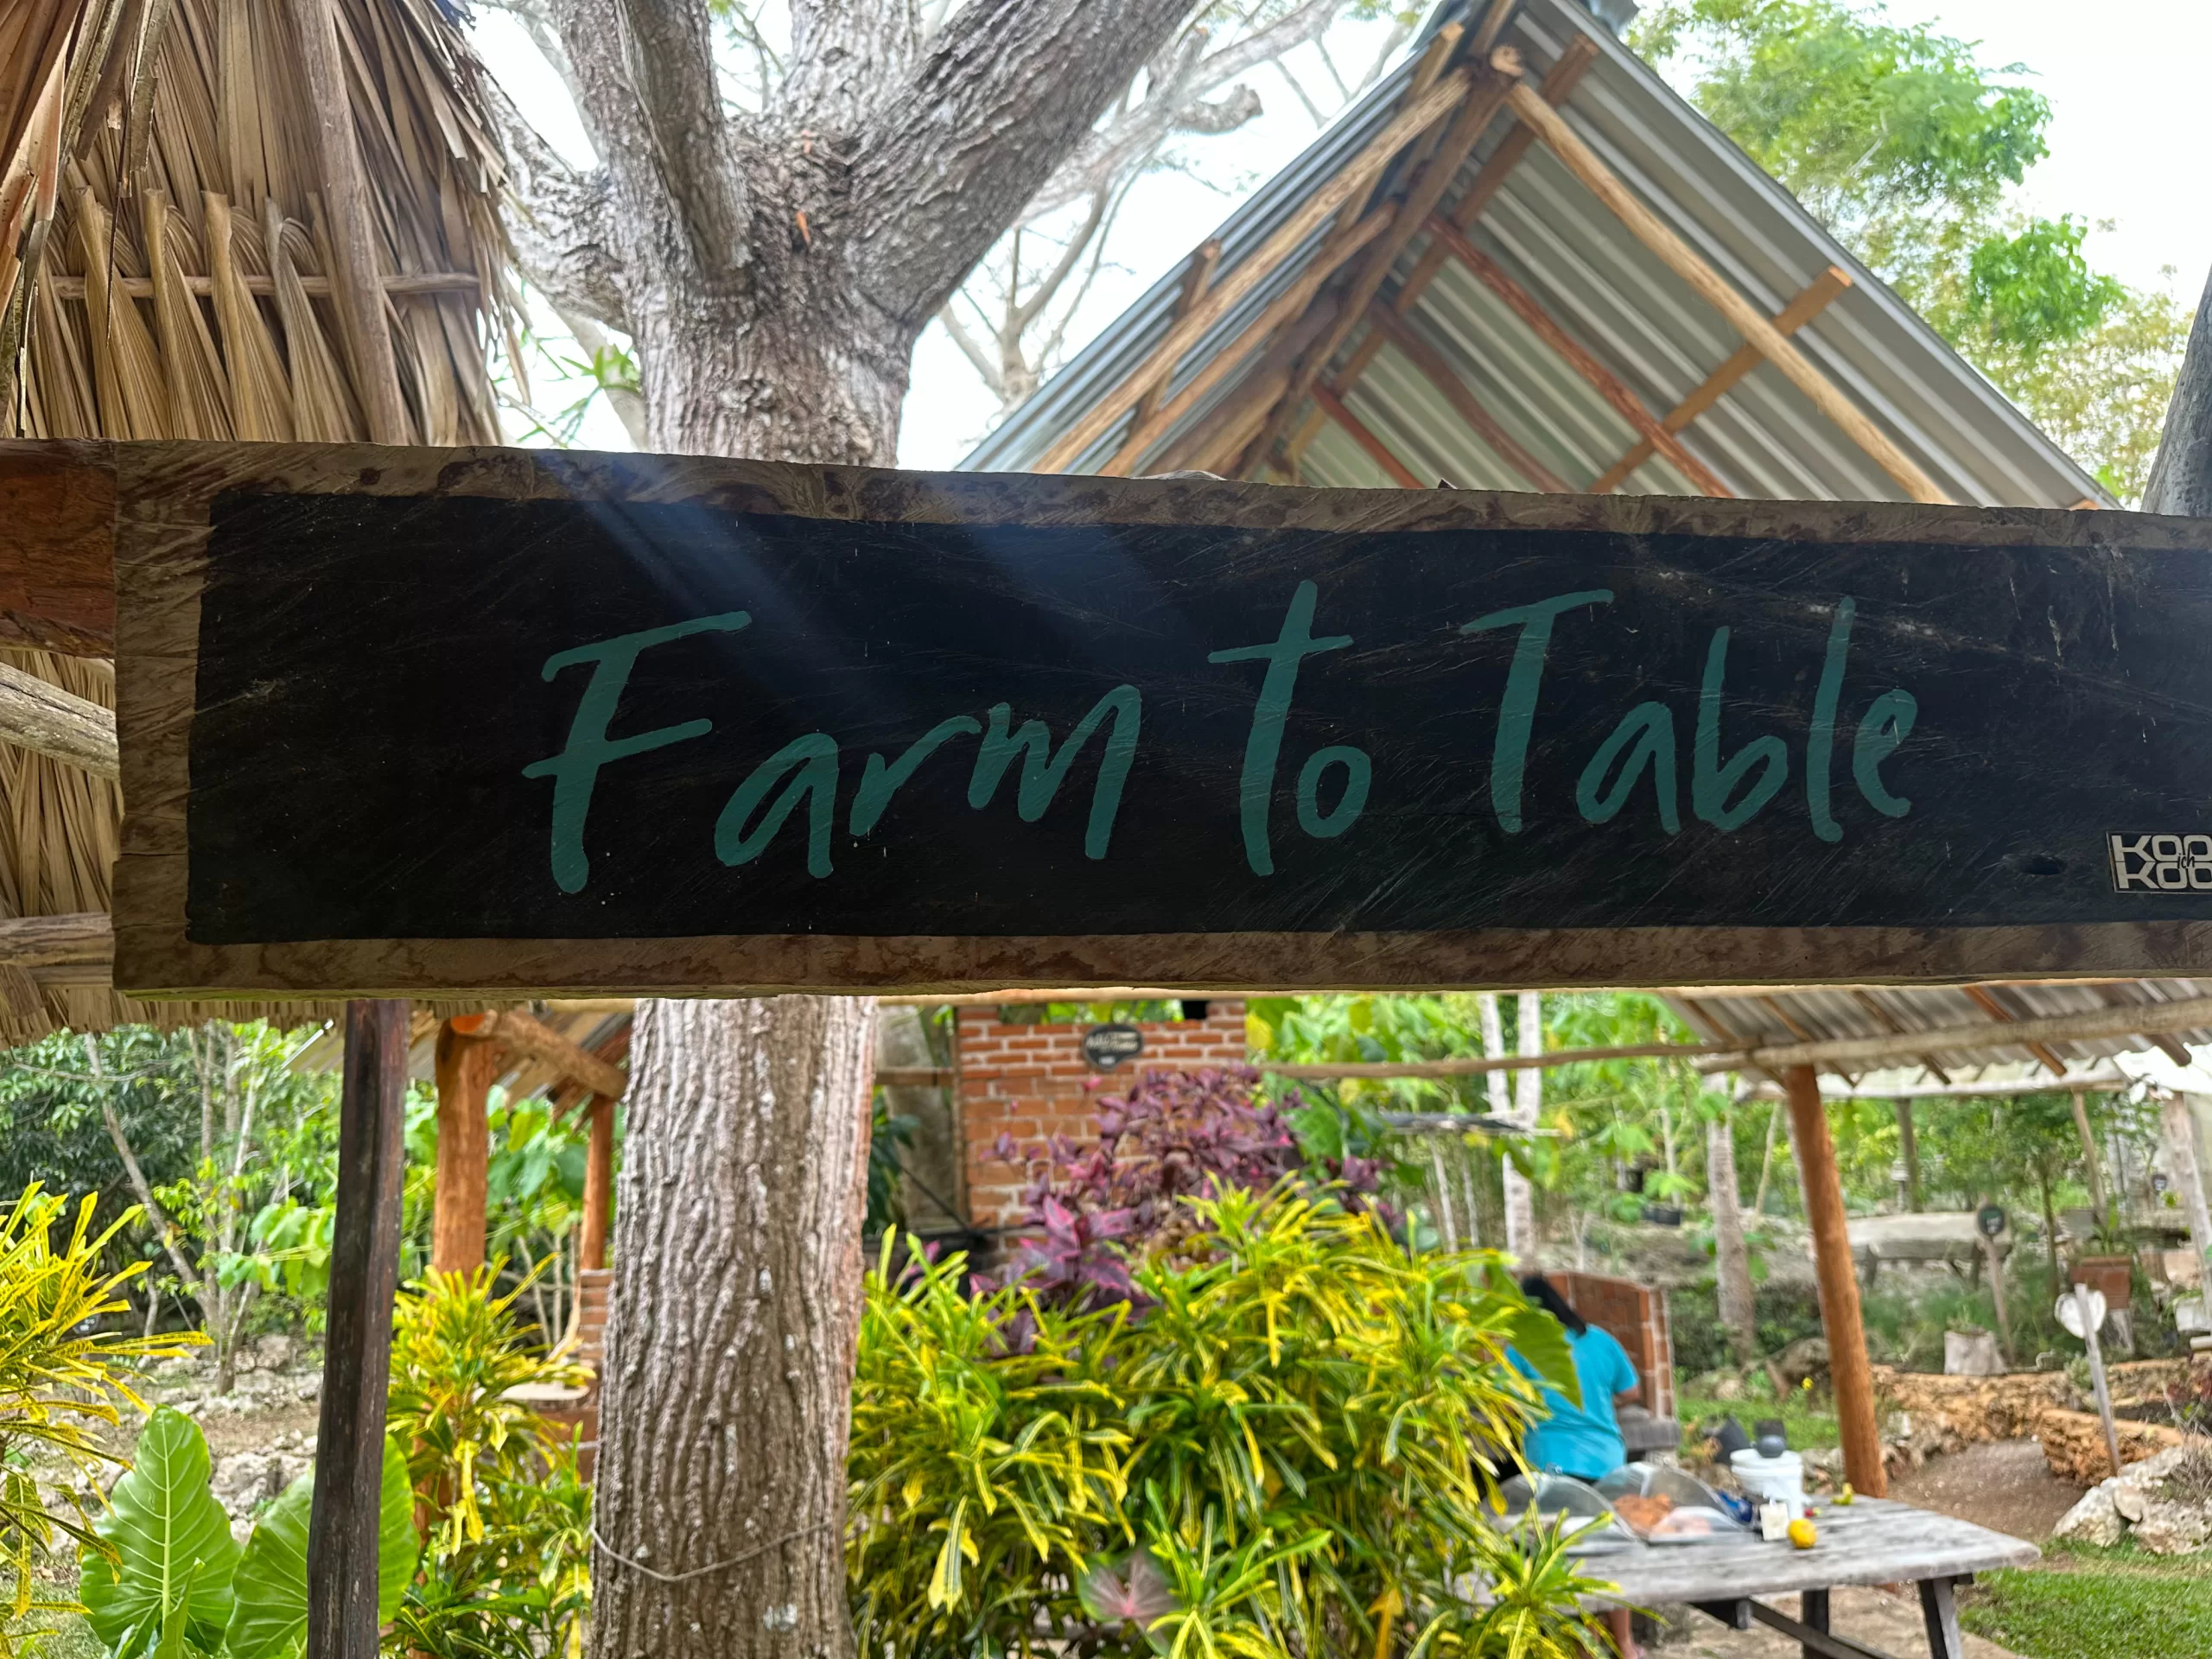 A wooden sign that reads "Farm to table".